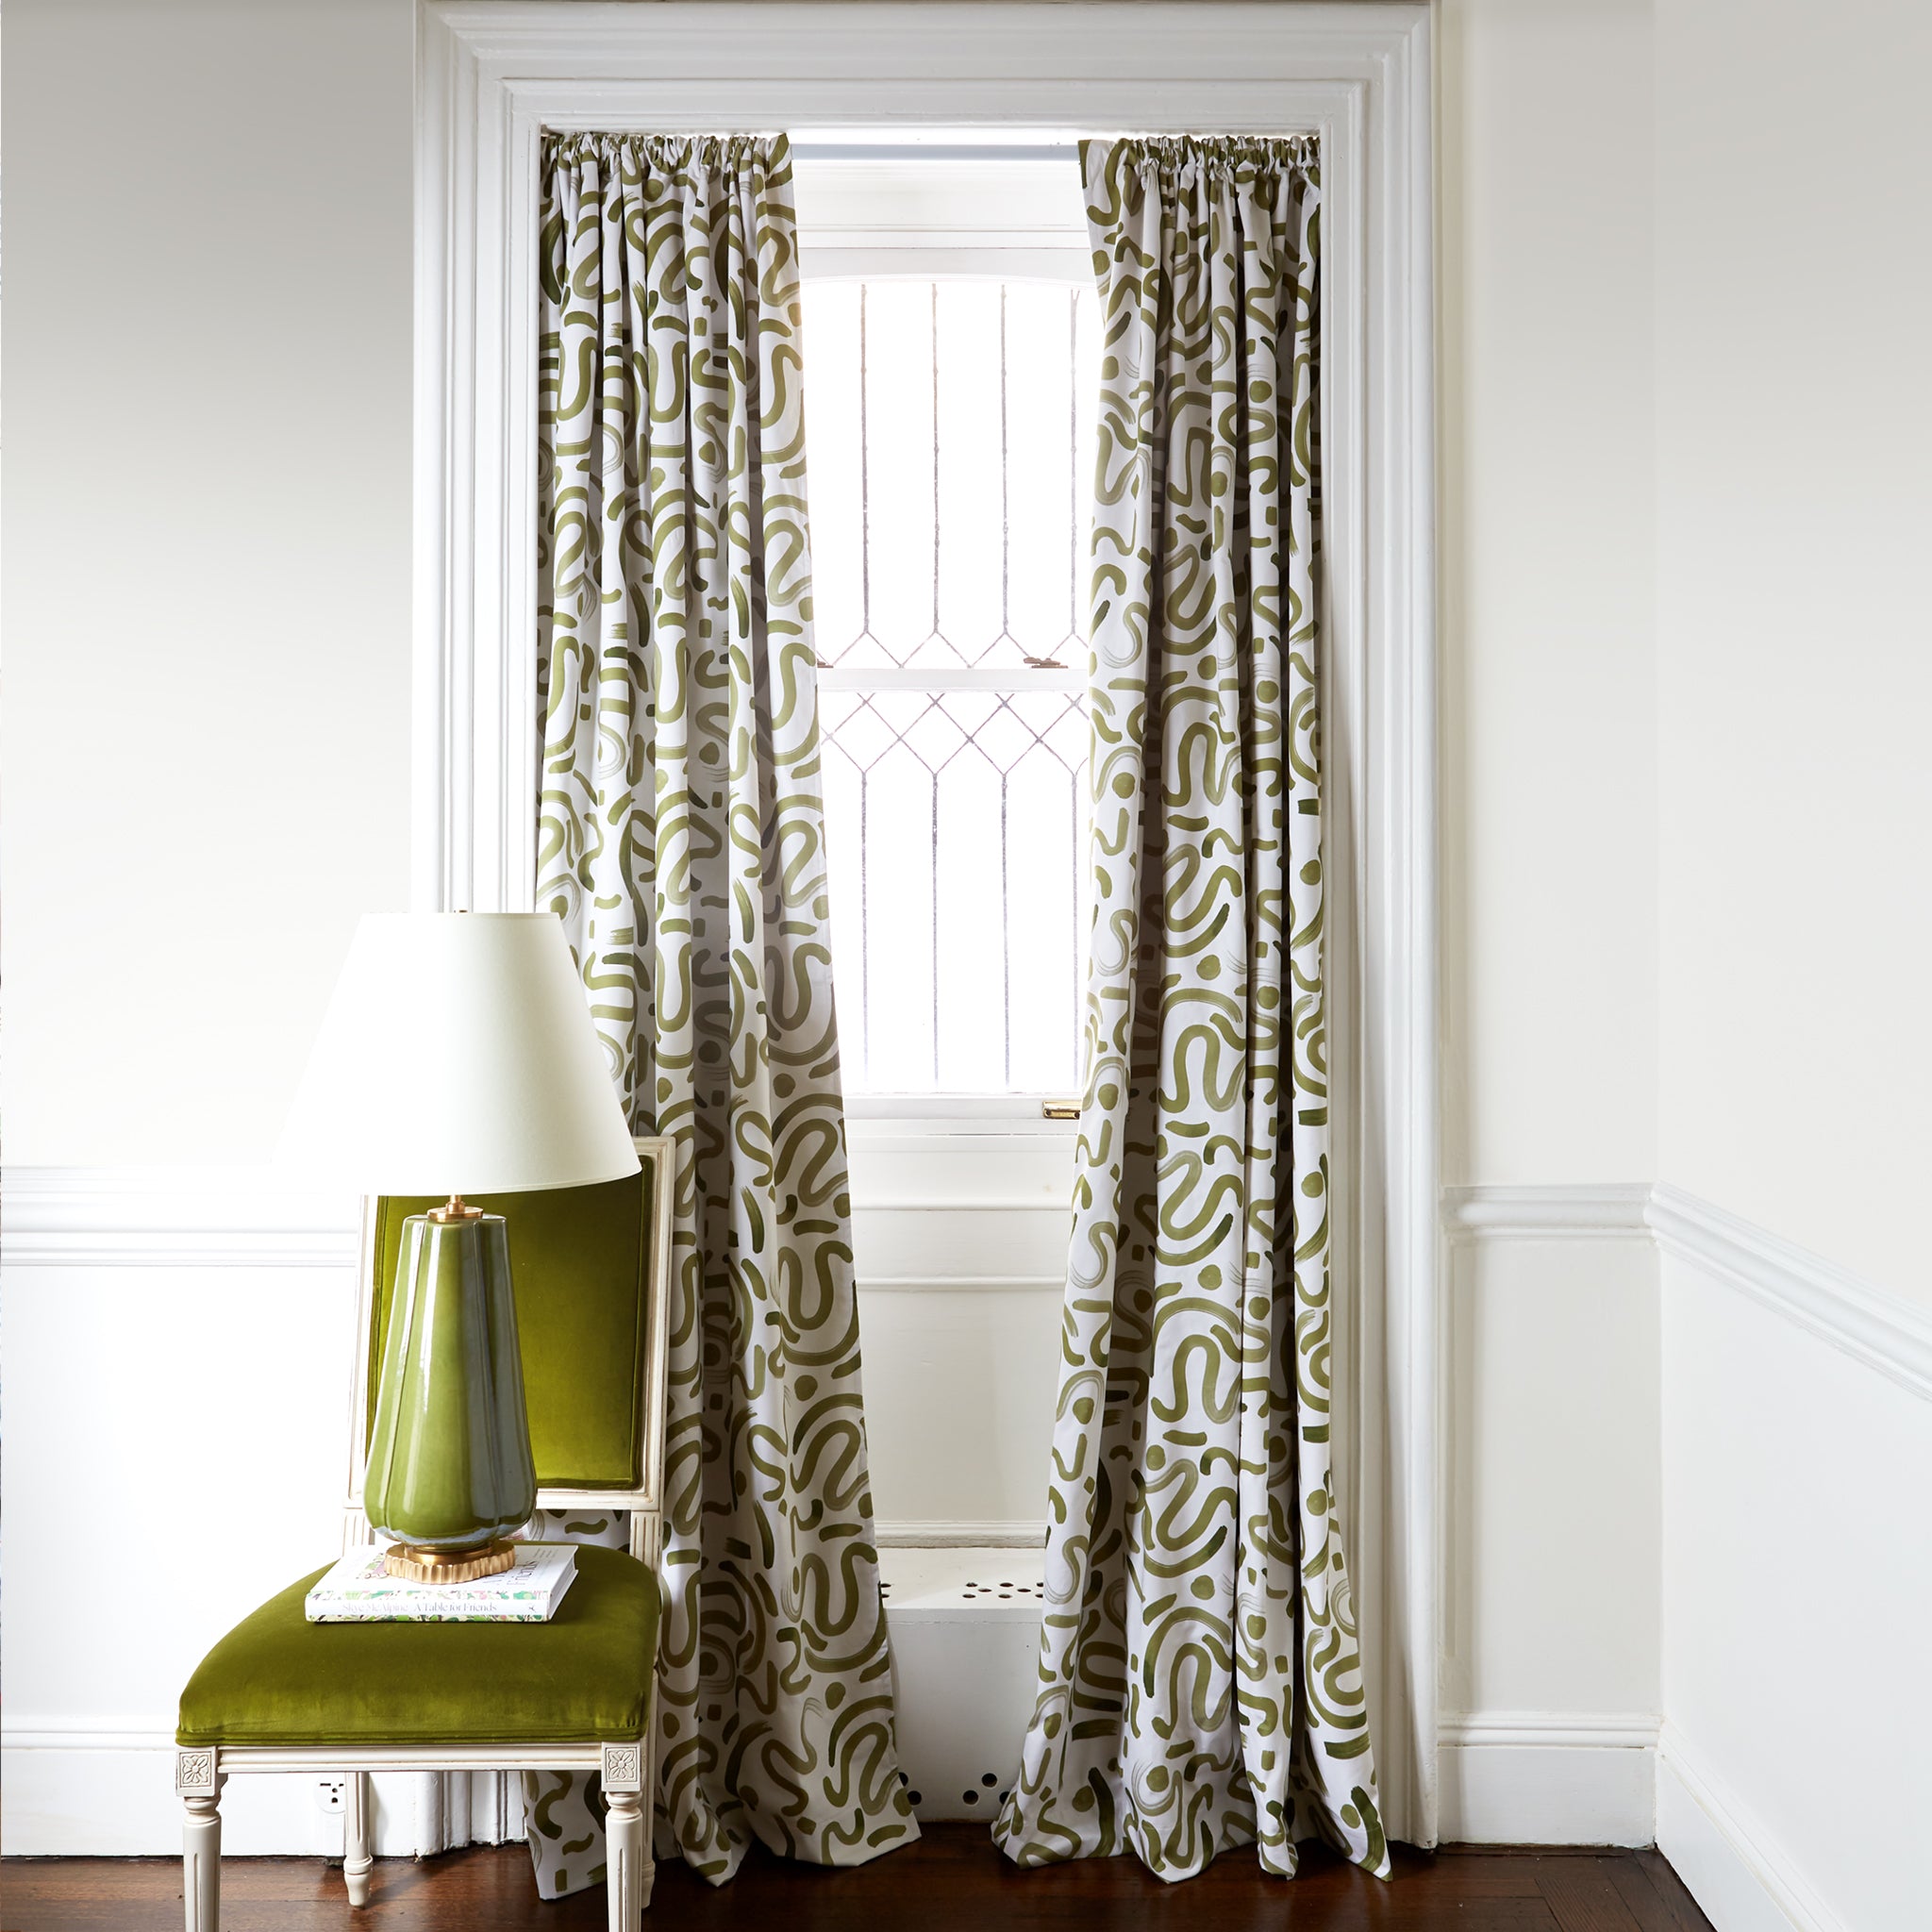 Green abstract custom curtain hanging on window in room with white walls and green chair